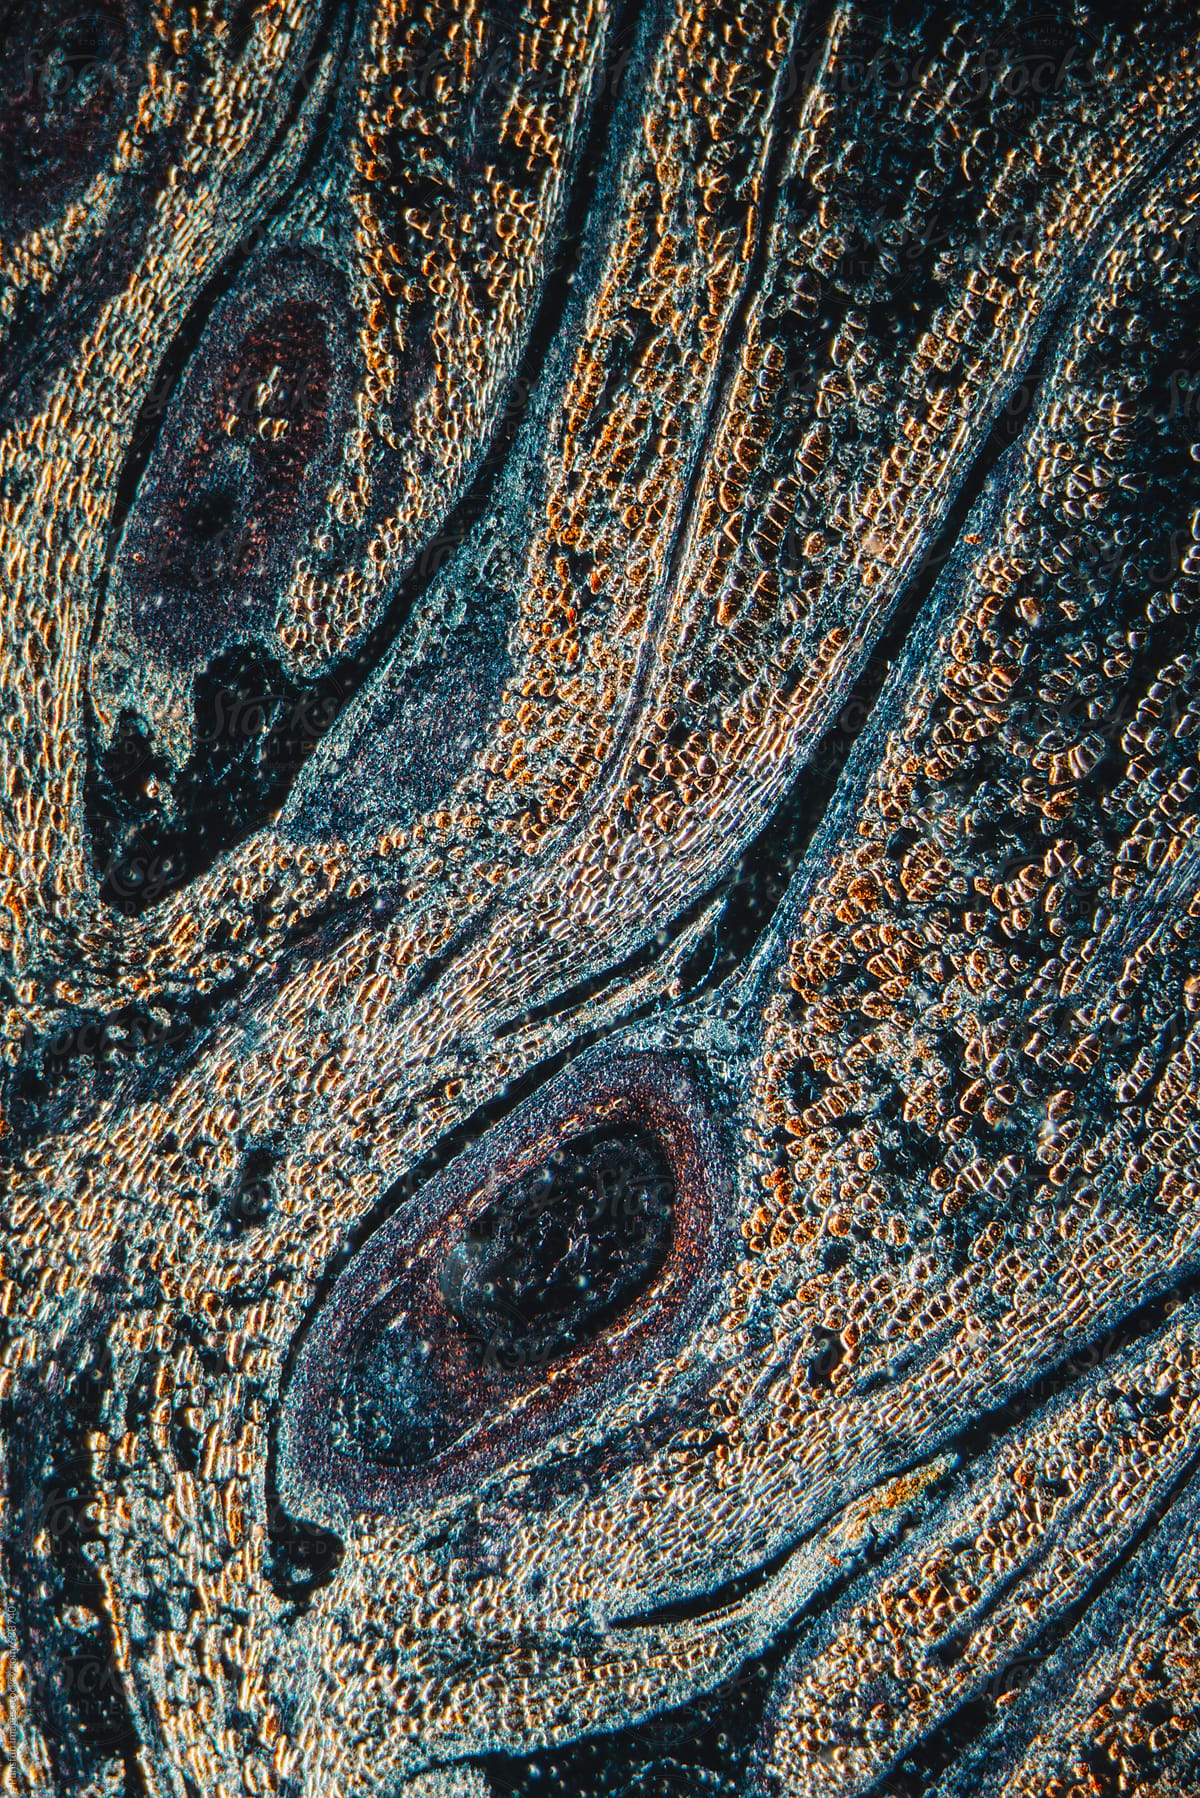 plant cells of pine cone, micrograph.